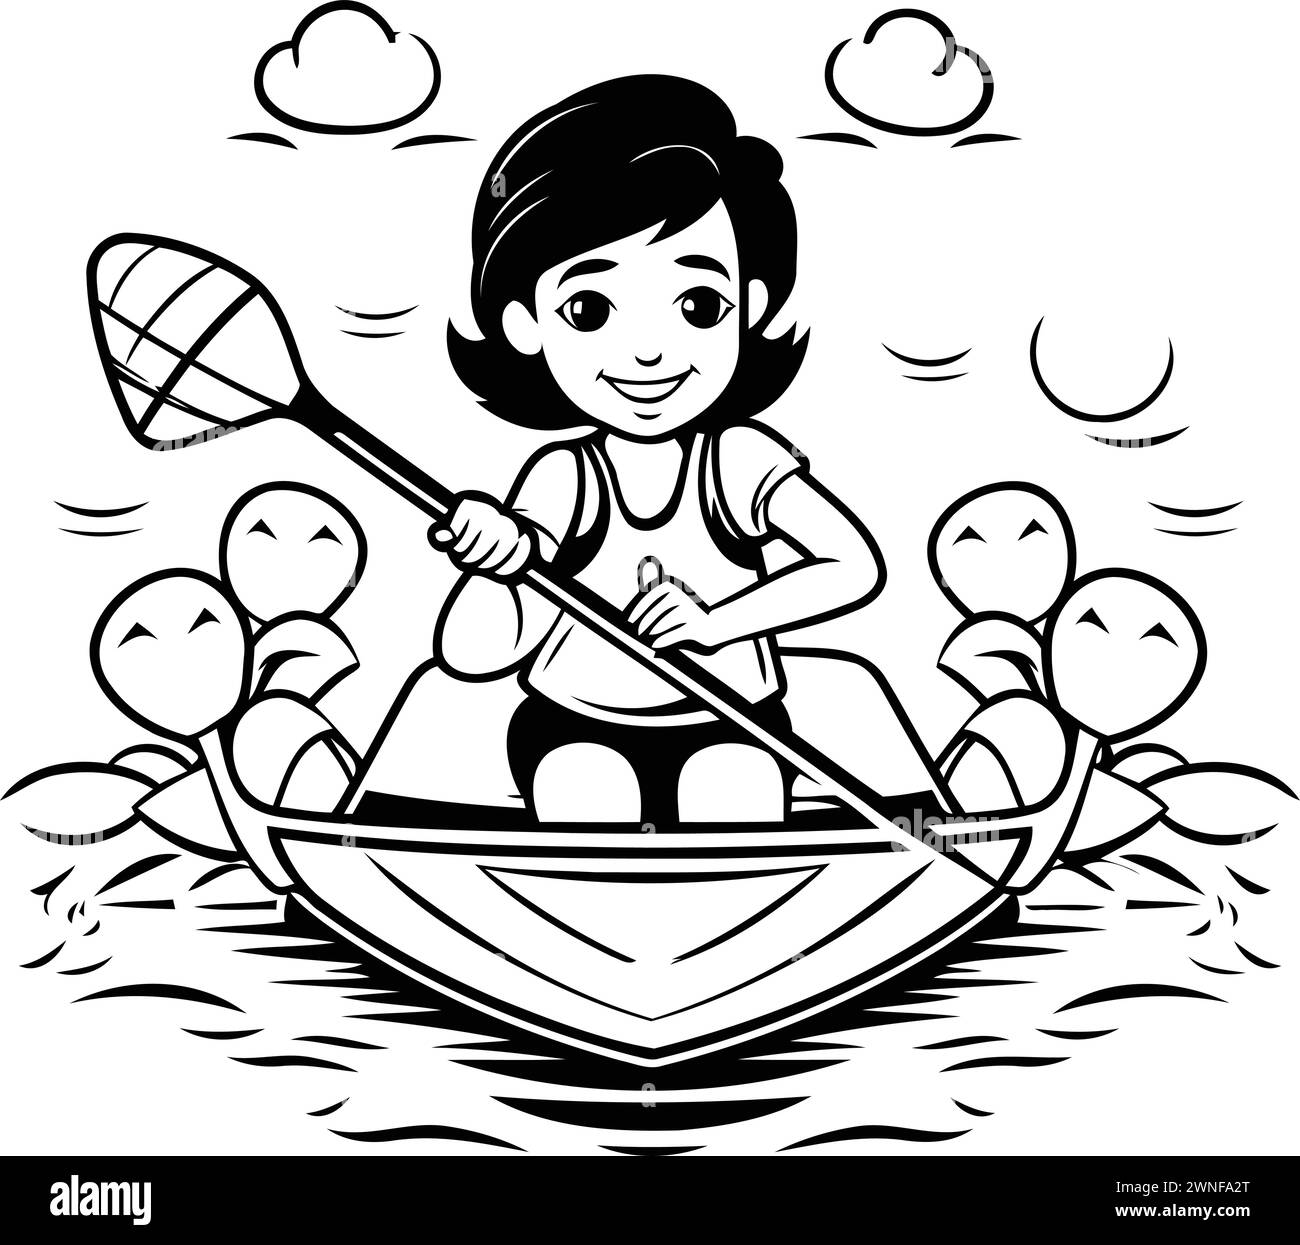 Black and White Cartoon Illustration of Little Girl Rafting a Canoe or Kayak with Her Family or Friends on the Water Stock Vector